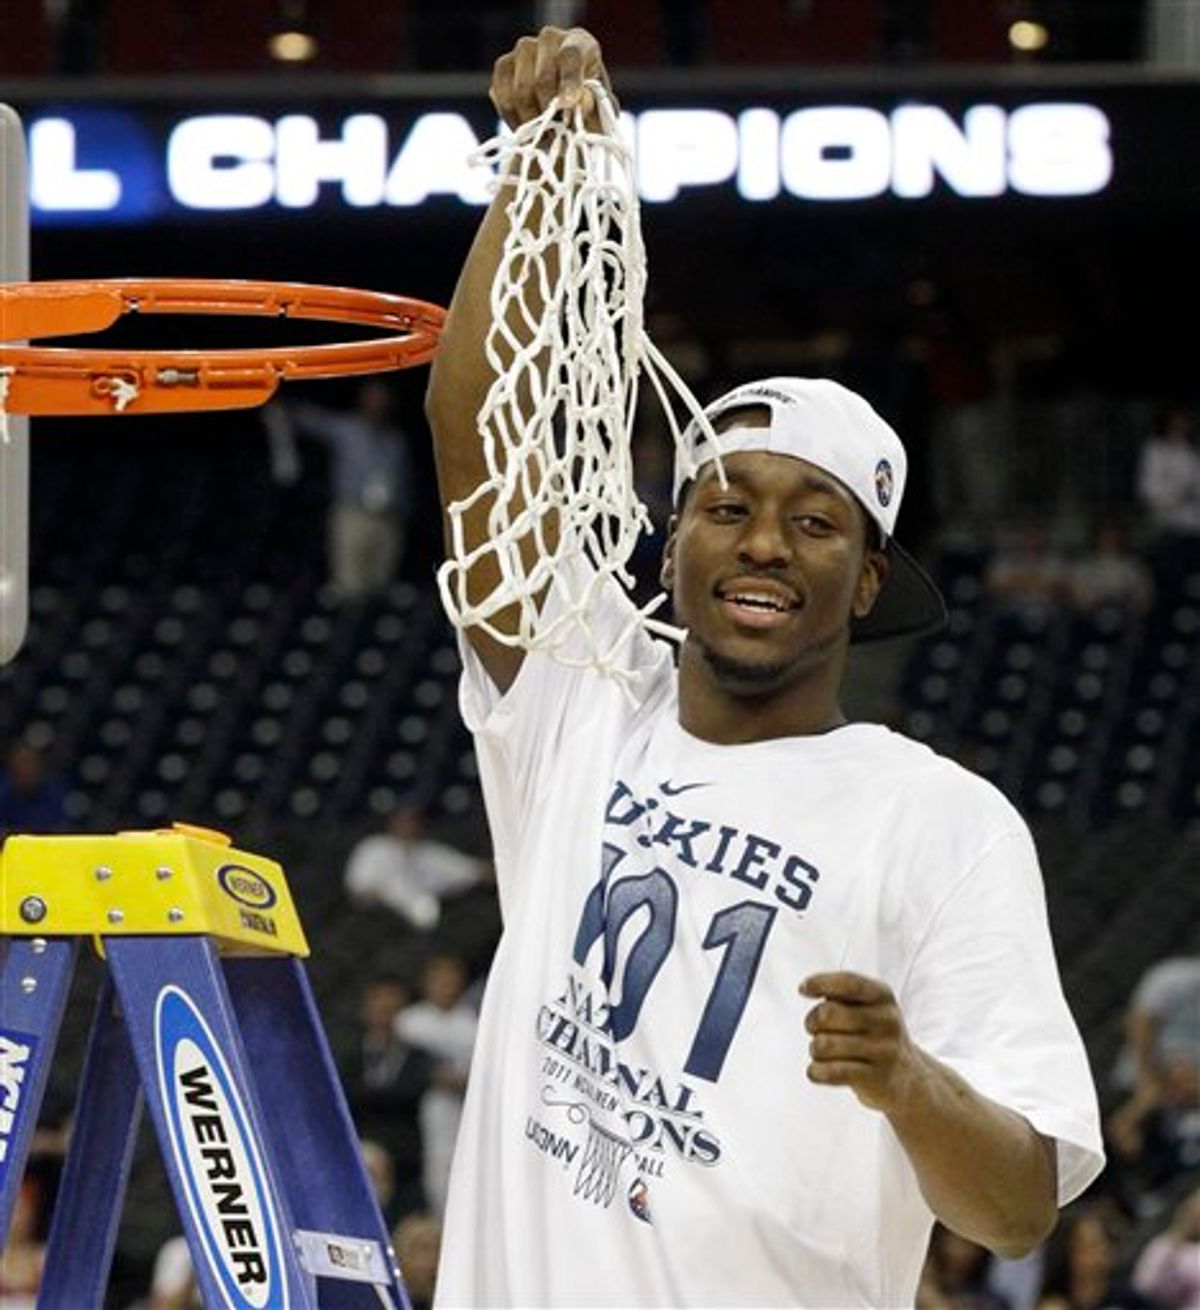 Connecticut's Kemba Walker holds the net after his team won the men's NCAA Final Four college basketball championship game against Butler  53-41 Monday, April 4, 2011, in Houston. (AP Photo/David J. Phillip)  (AP)